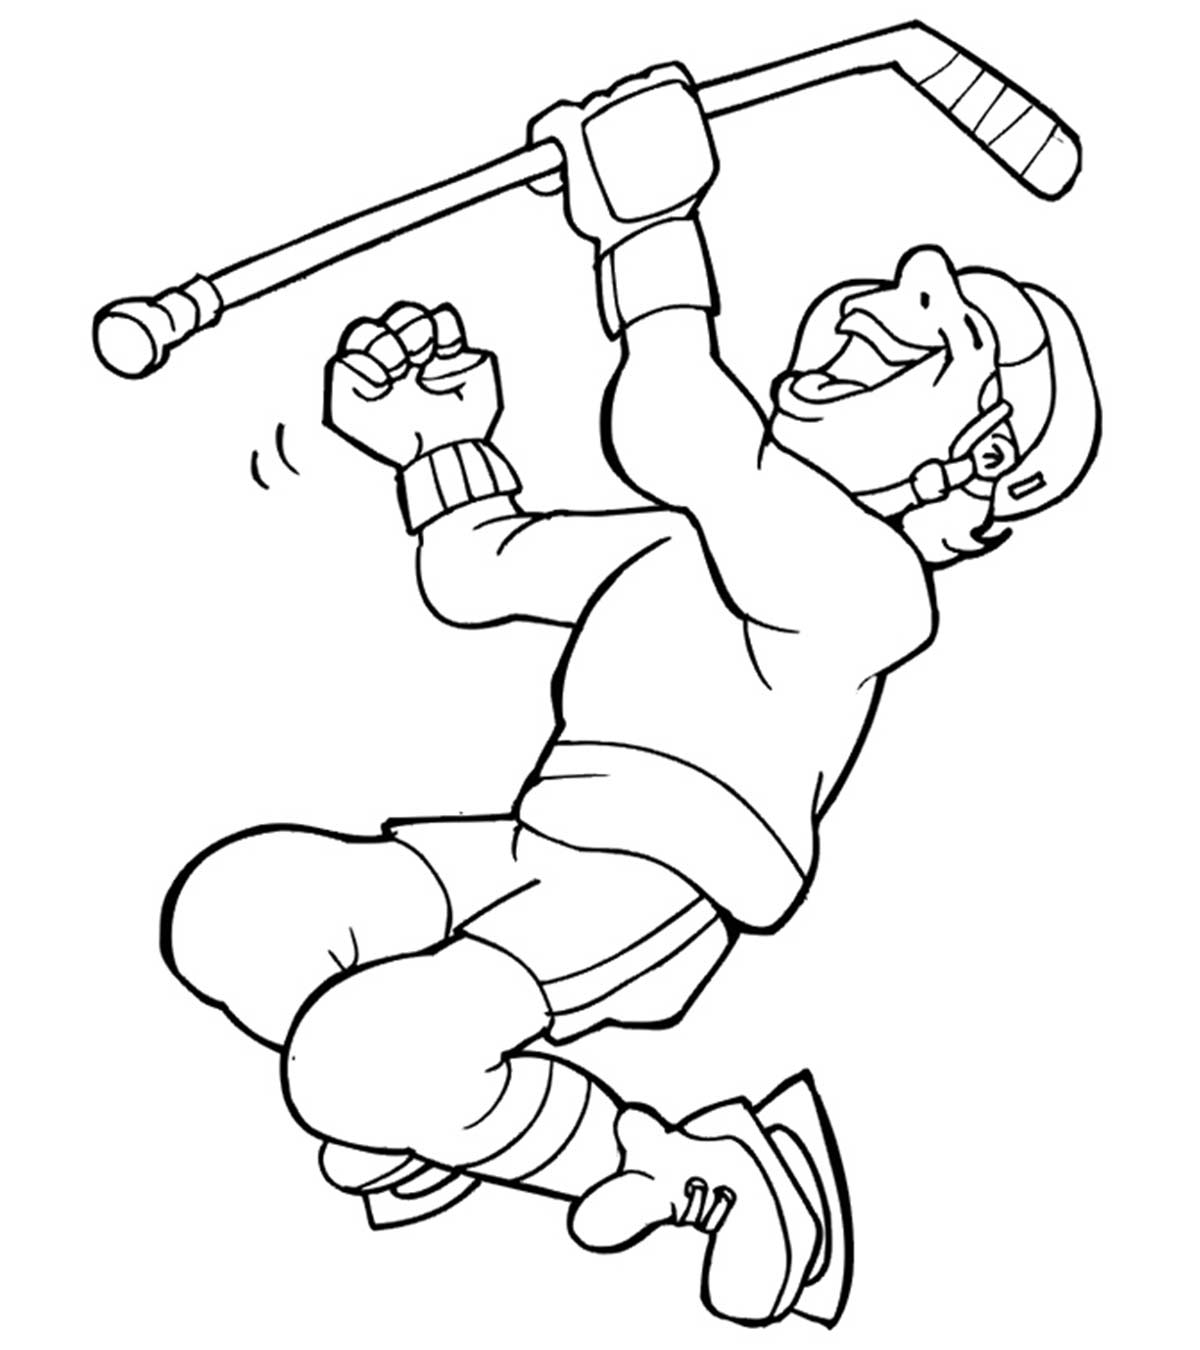 10 Best Hockey Coloring Pages Your Toddler Will Love To Color